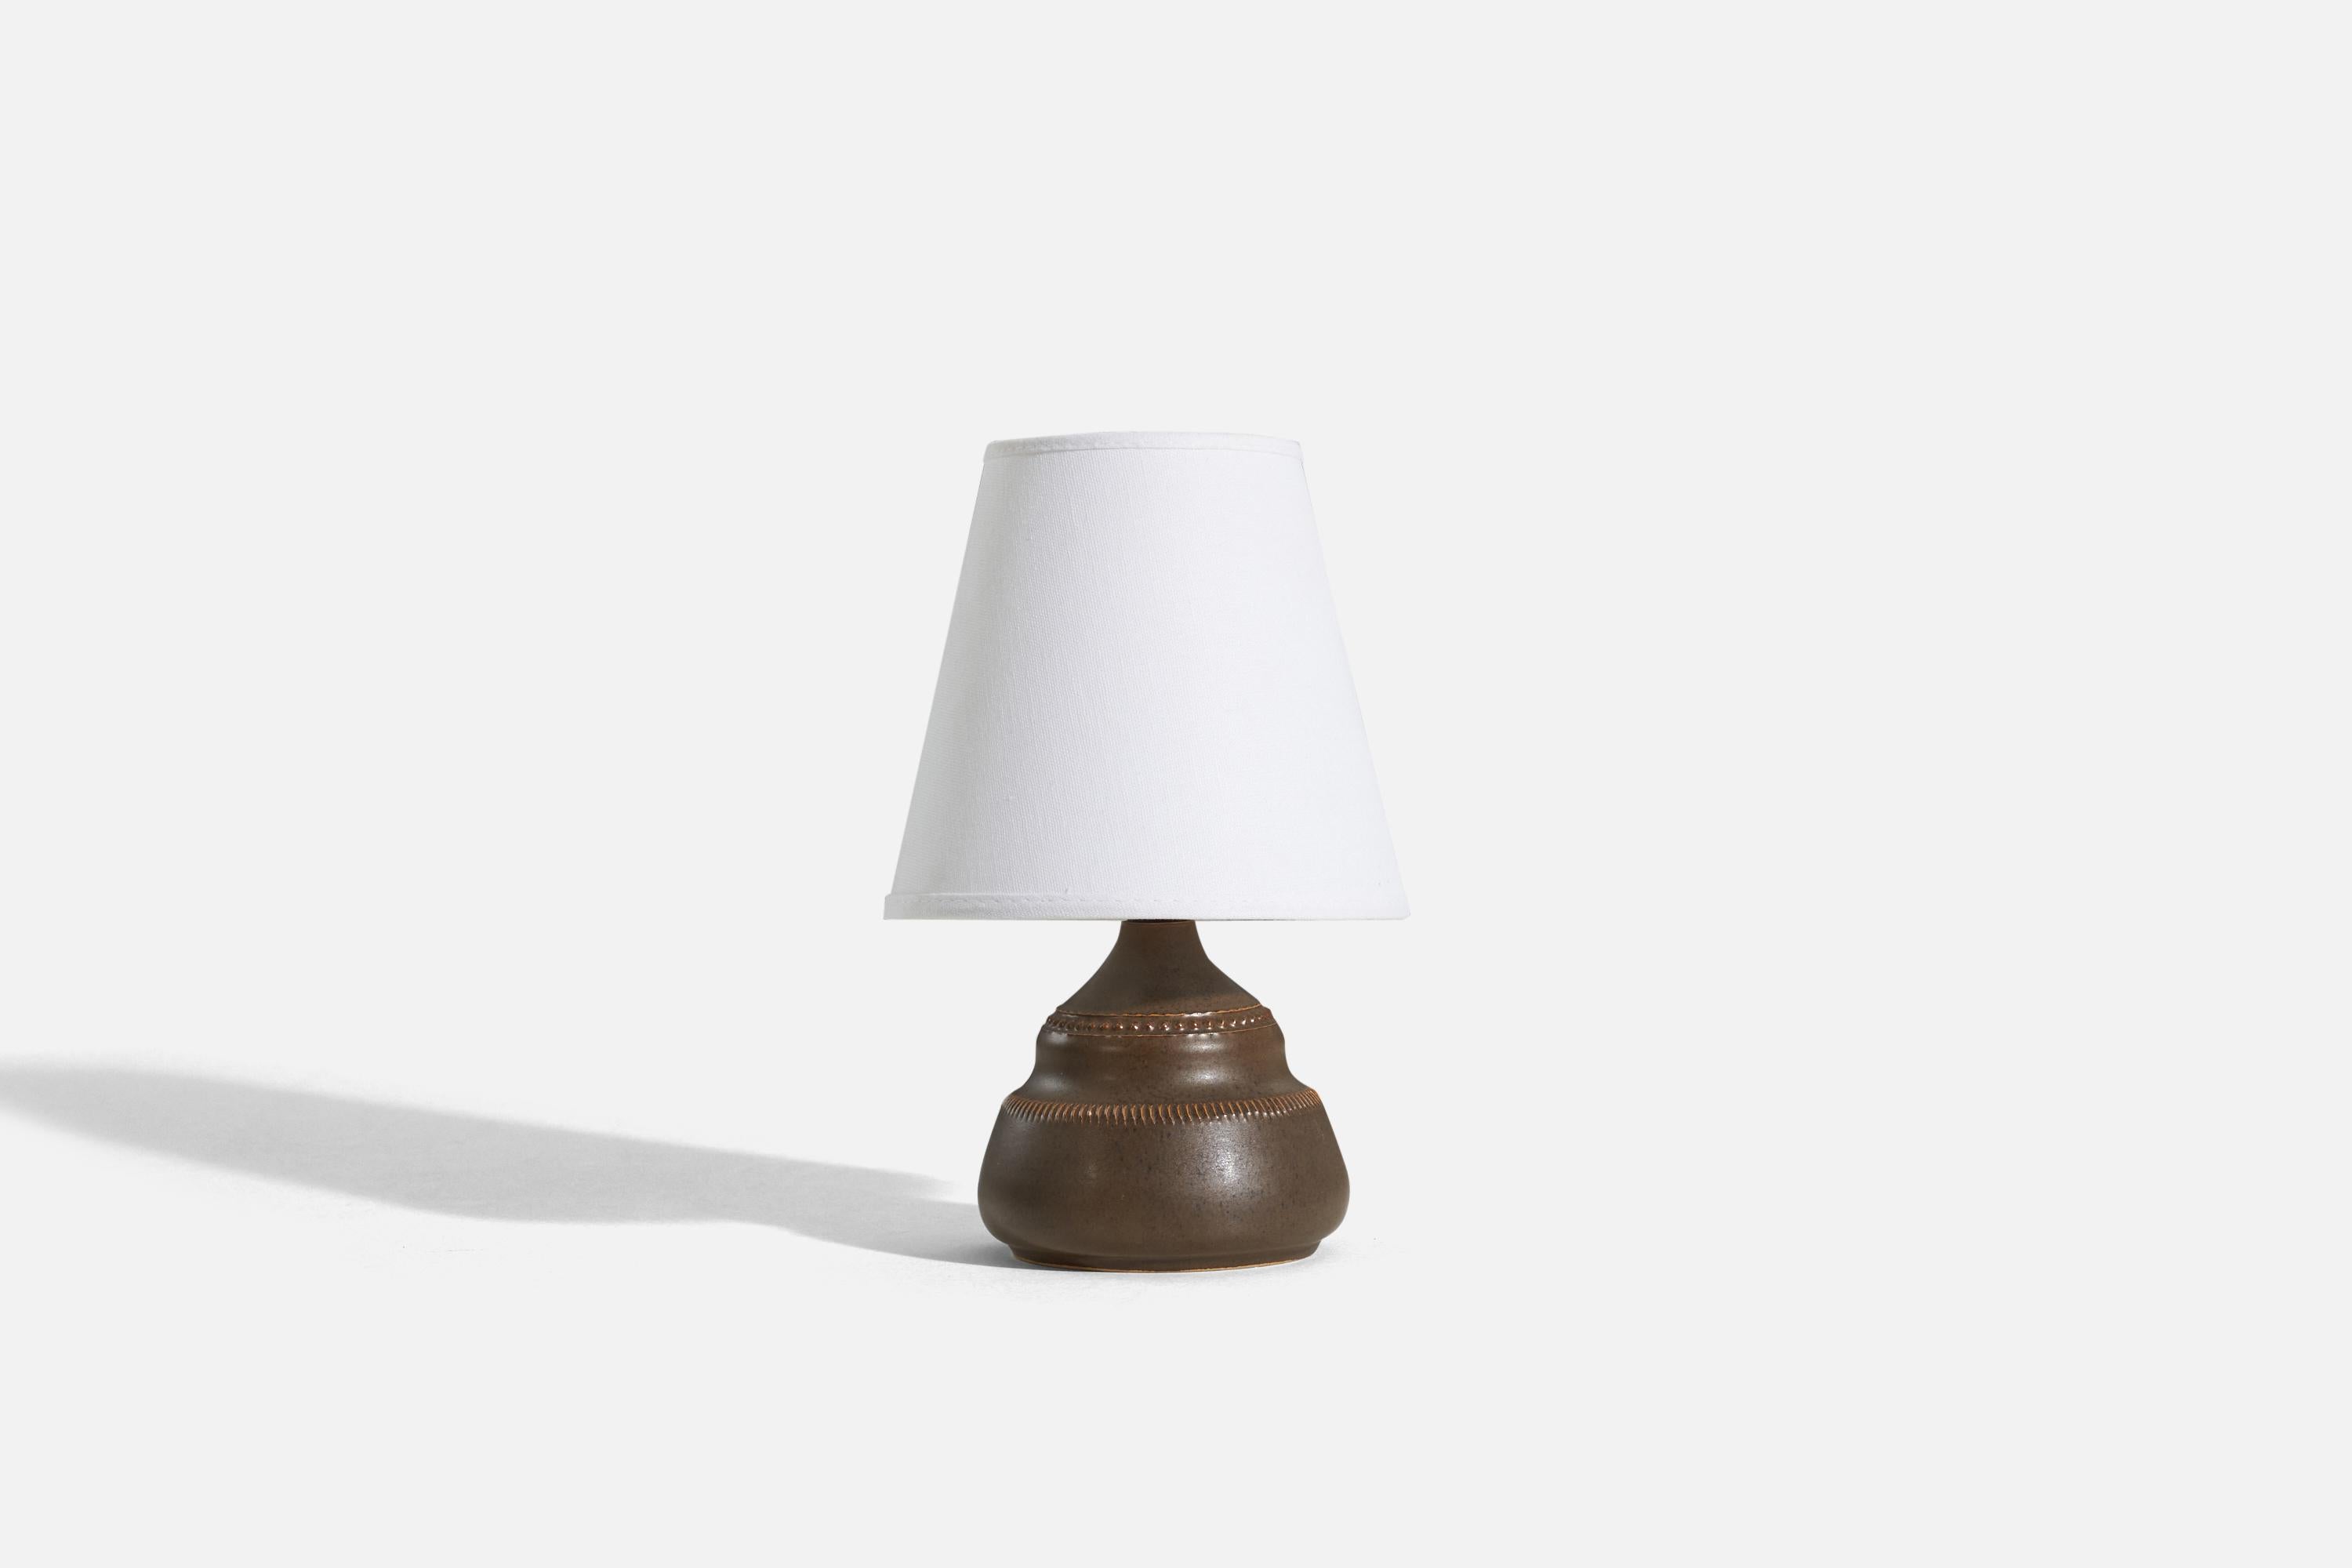 A brown, glazed stoneware table lamp designed and produced by Klase Höganäs, Sweden, 1960s. Signed on bottom. 

Sold without lampshade. 
Dimensions of Lamp (inches) : 6.5625 x 5 x 5 (H x W x D)
Dimensions of Shade (inches) : 4 x 7 x 6.25 (T x B x